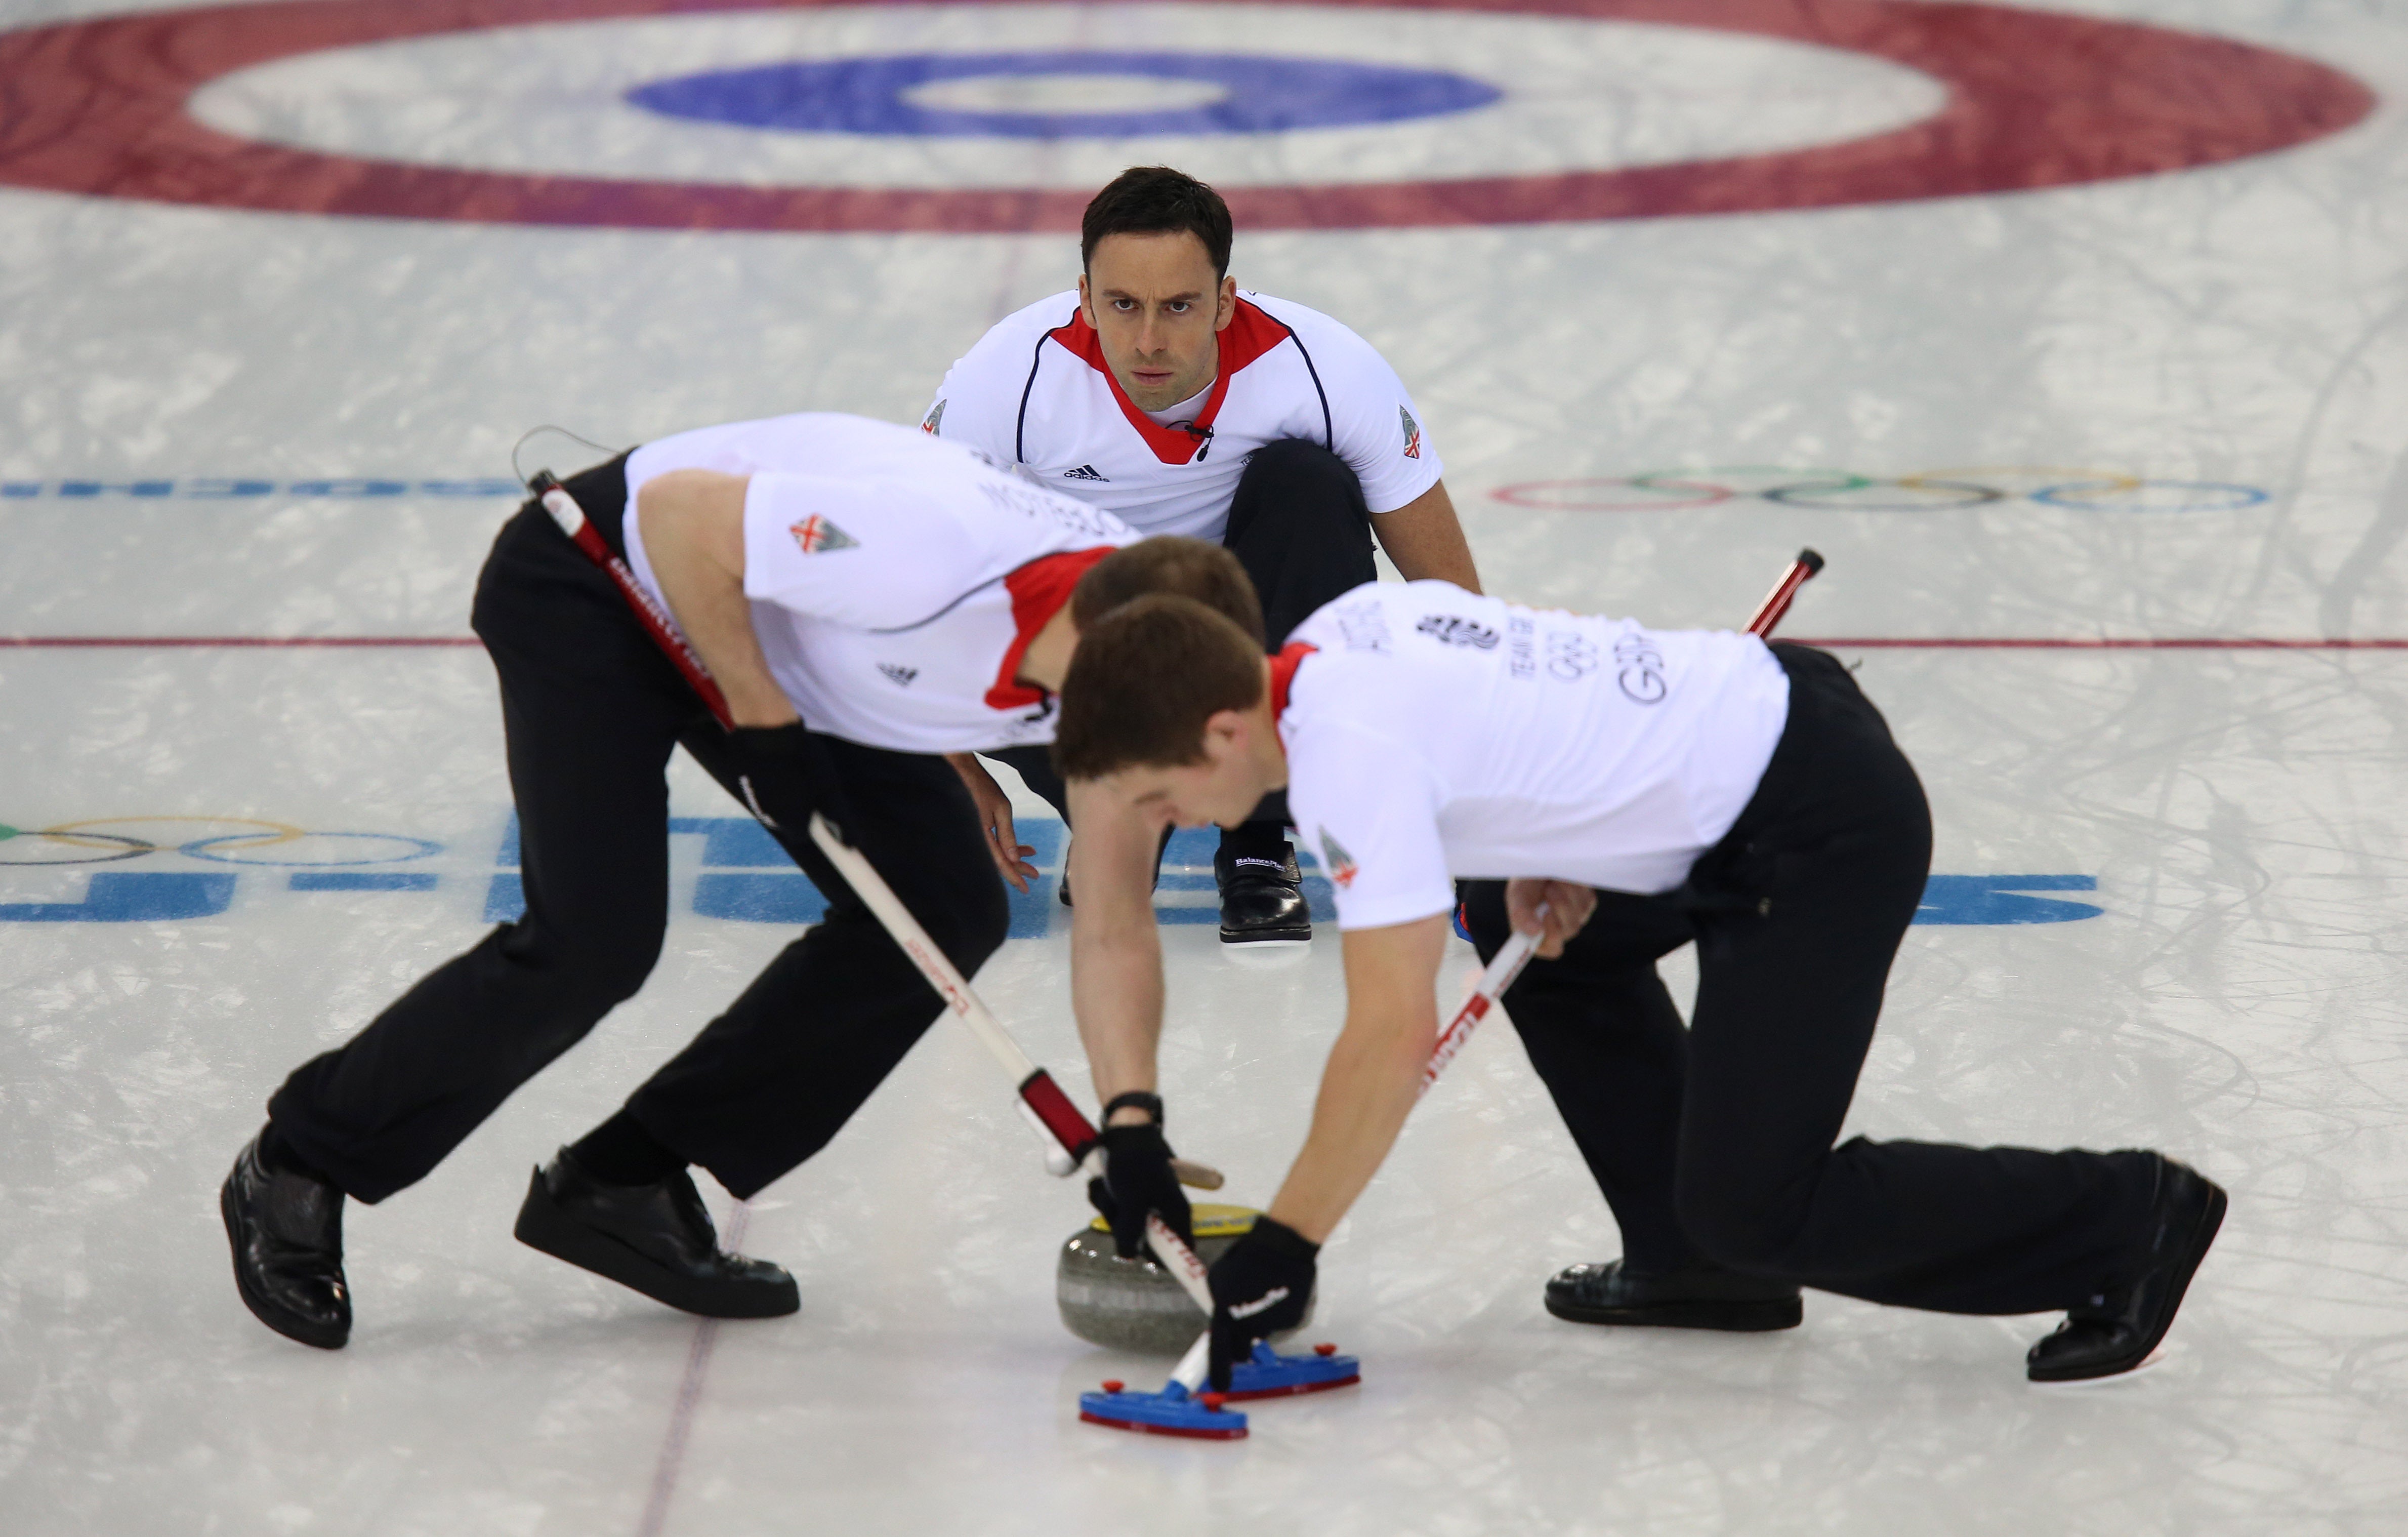 David Murdoch aims to lead Great Britain’s three curling teams to glory in Beijing (Mike Egerton/PA)